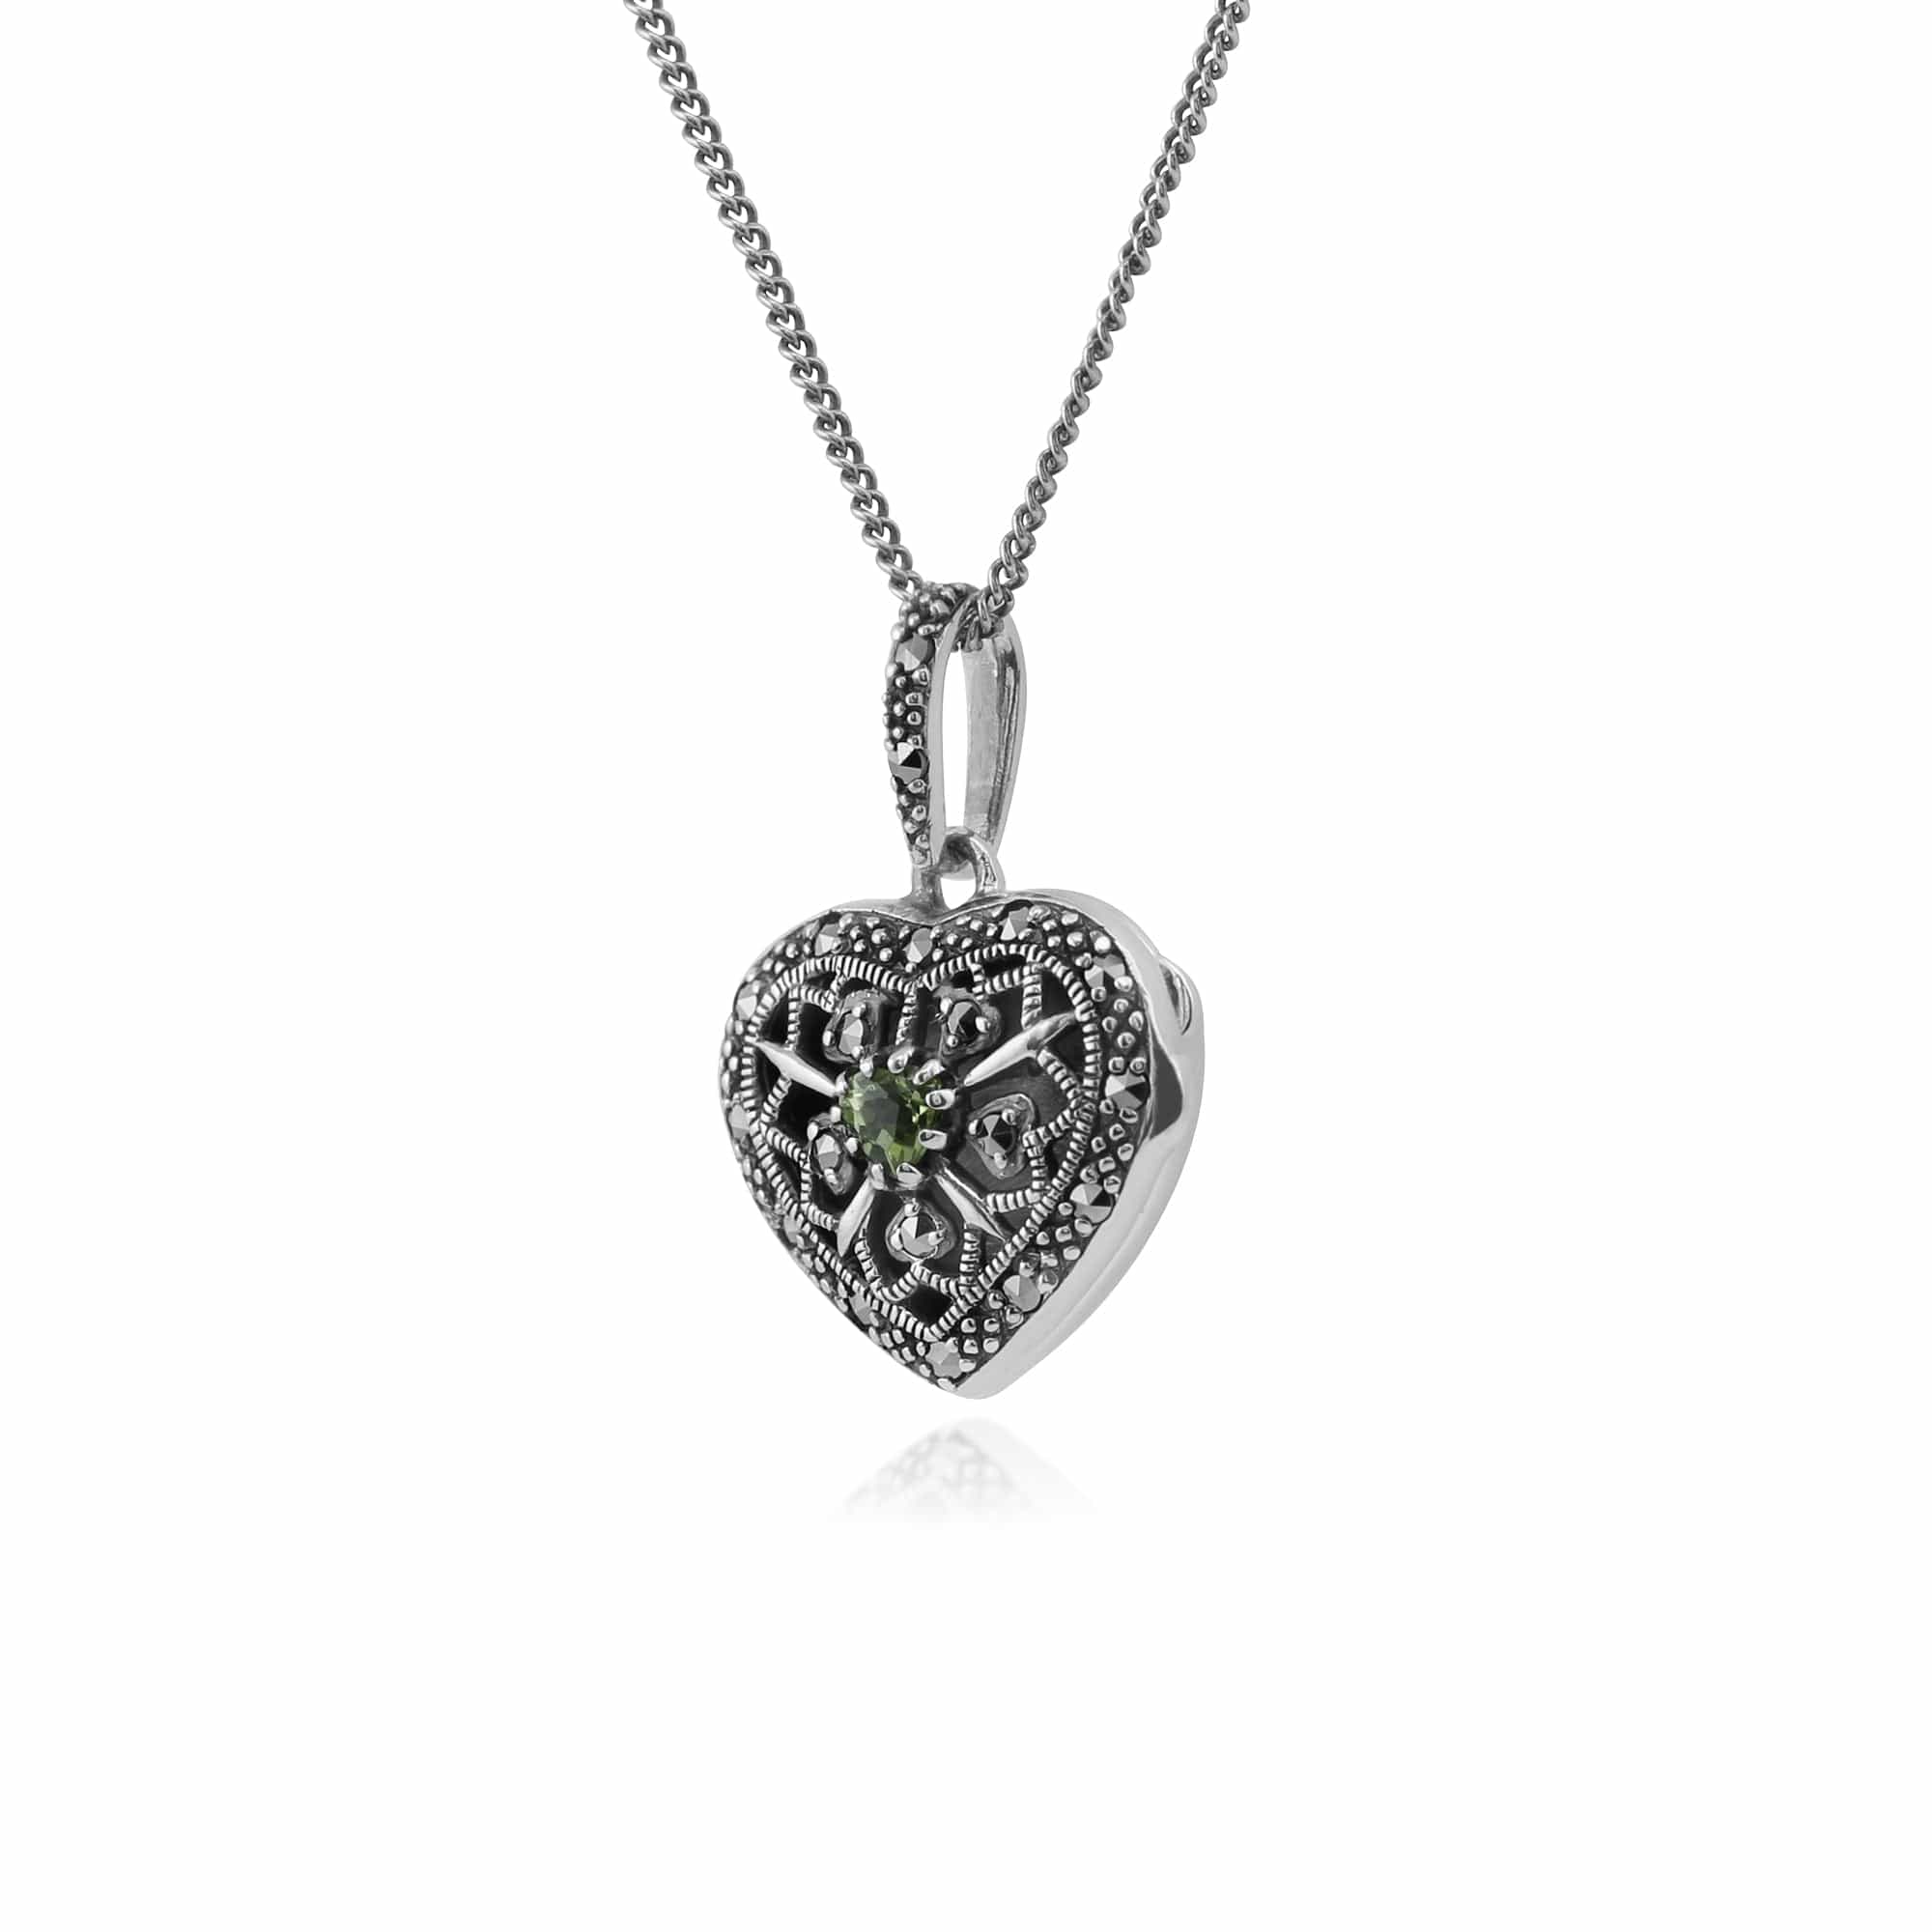 214N461907925 Art Nouveau Style Round Peridot & Marcasite Heart Necklace in 925 Sterling Silver 2